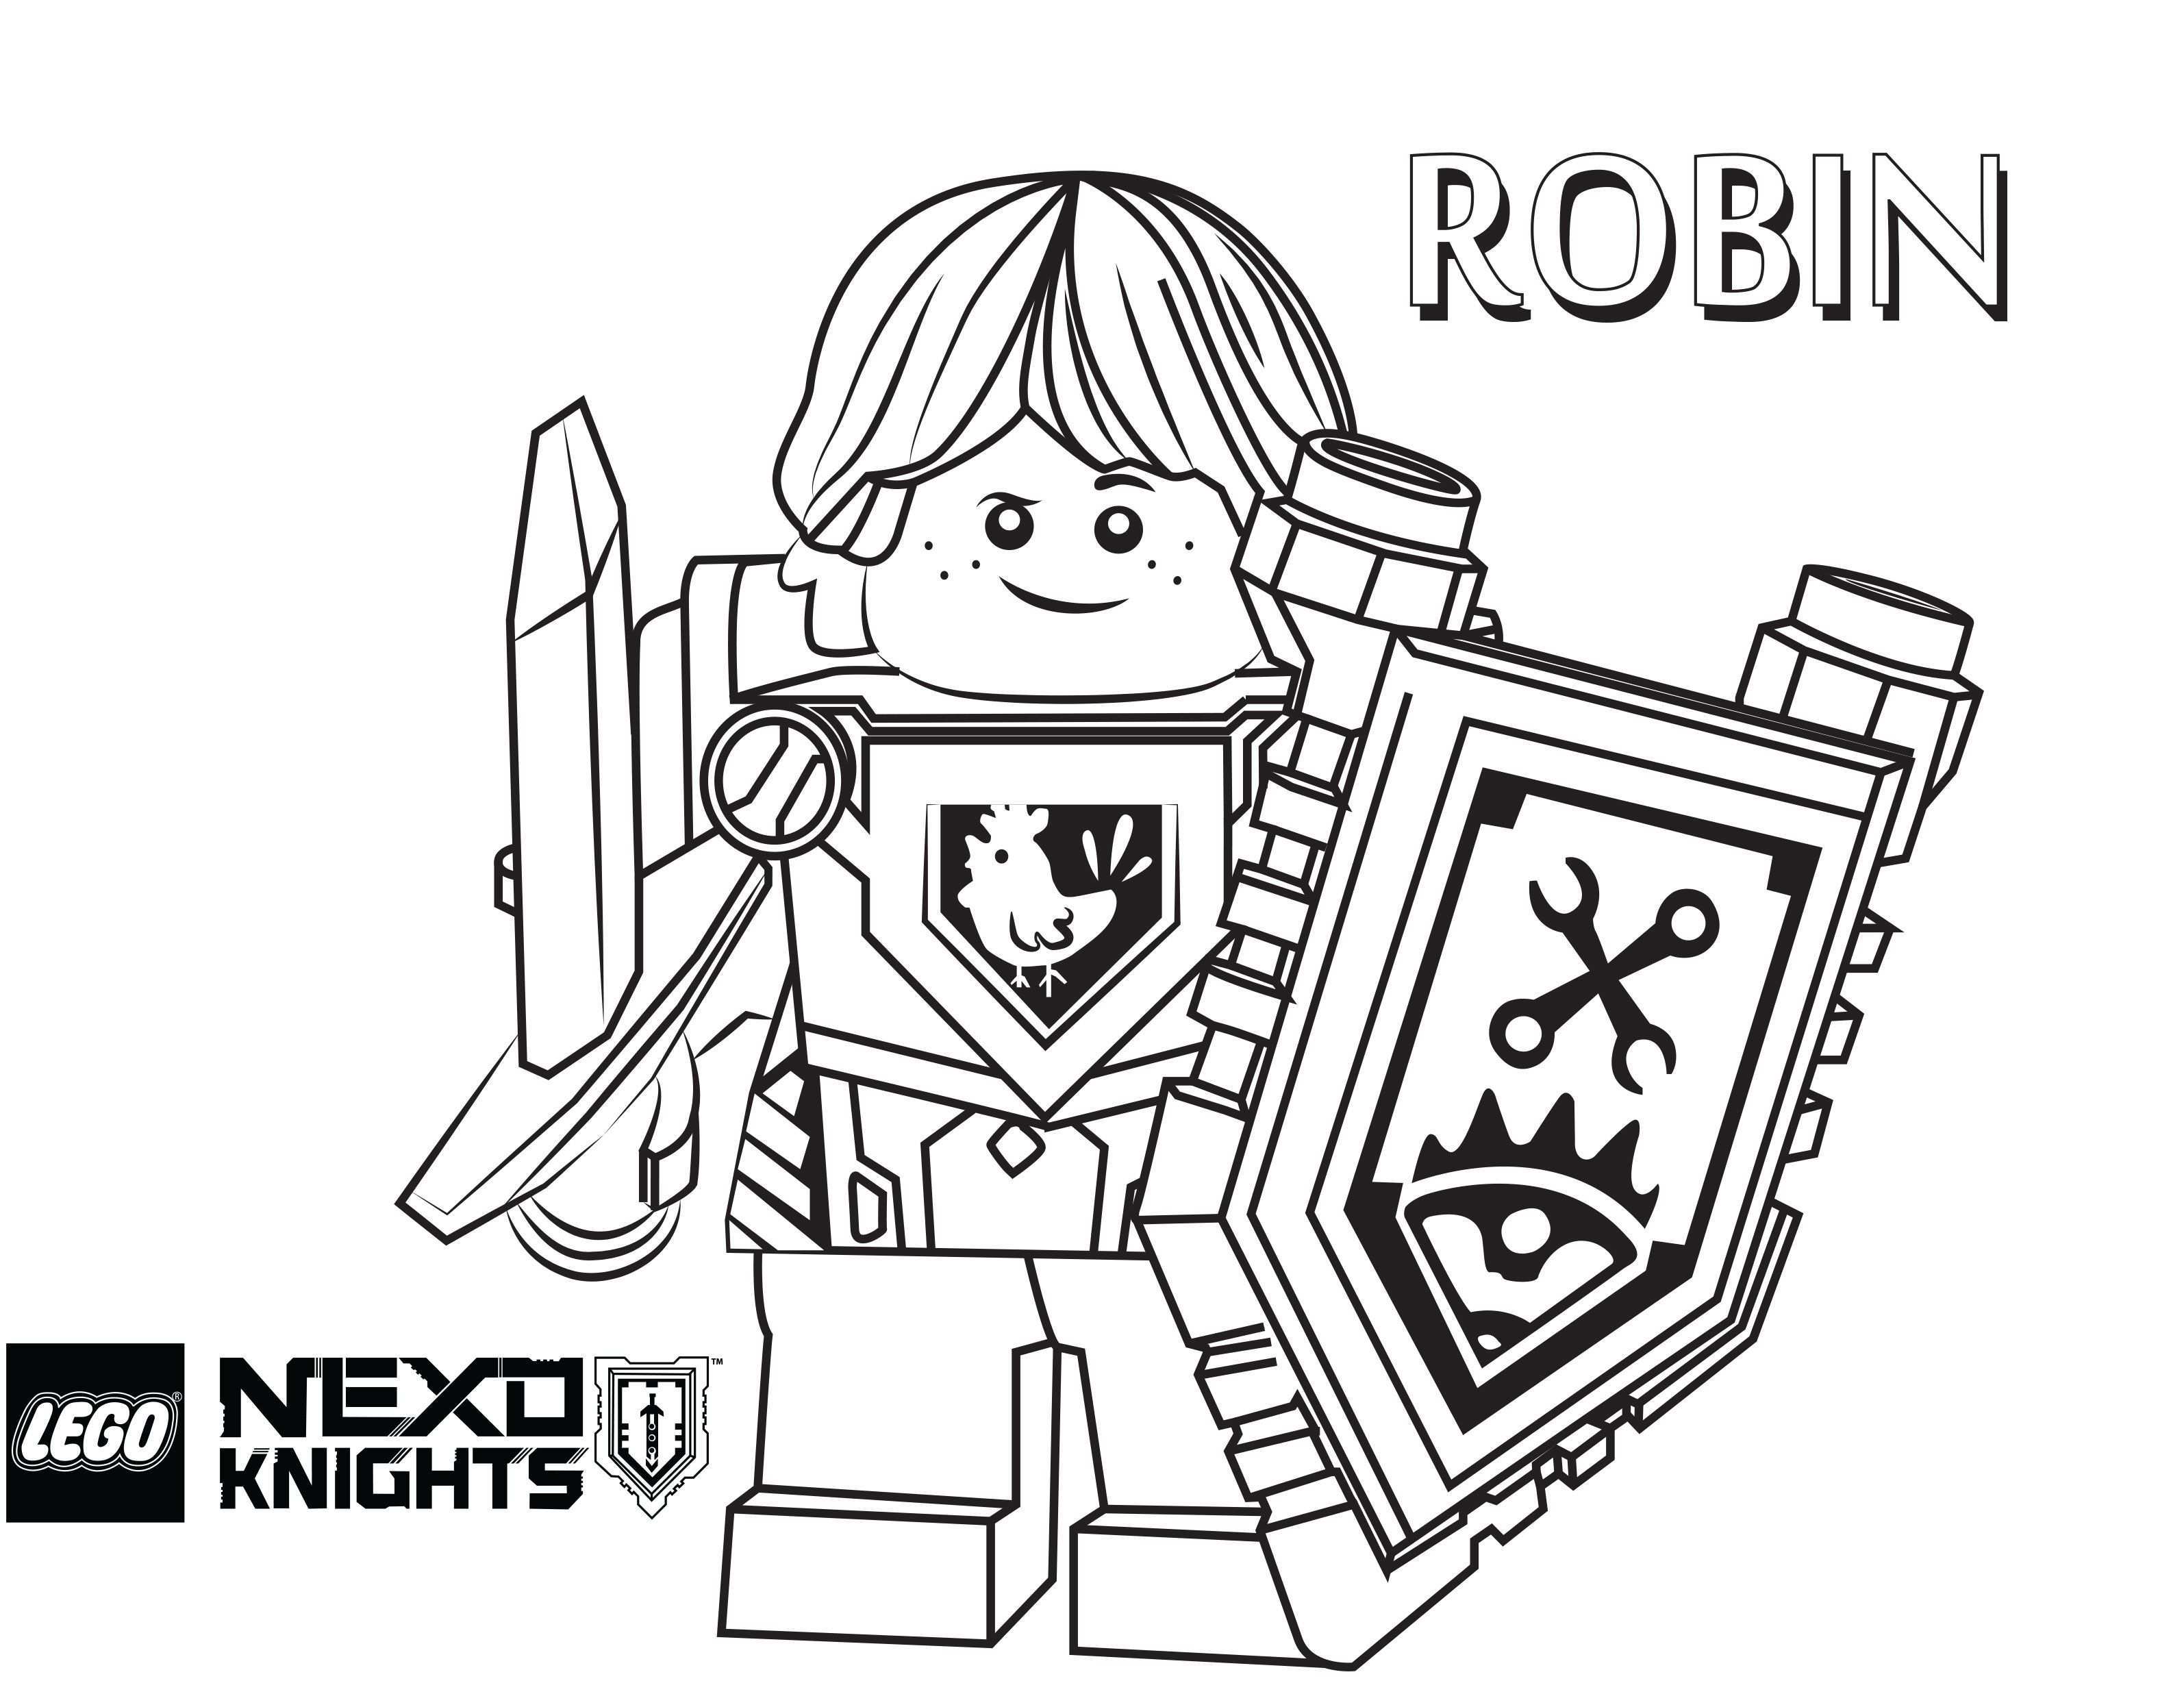 Lego Nexo Knights Coloring Pages Free Printable Lego Nexo Knights Color Sheets Superh